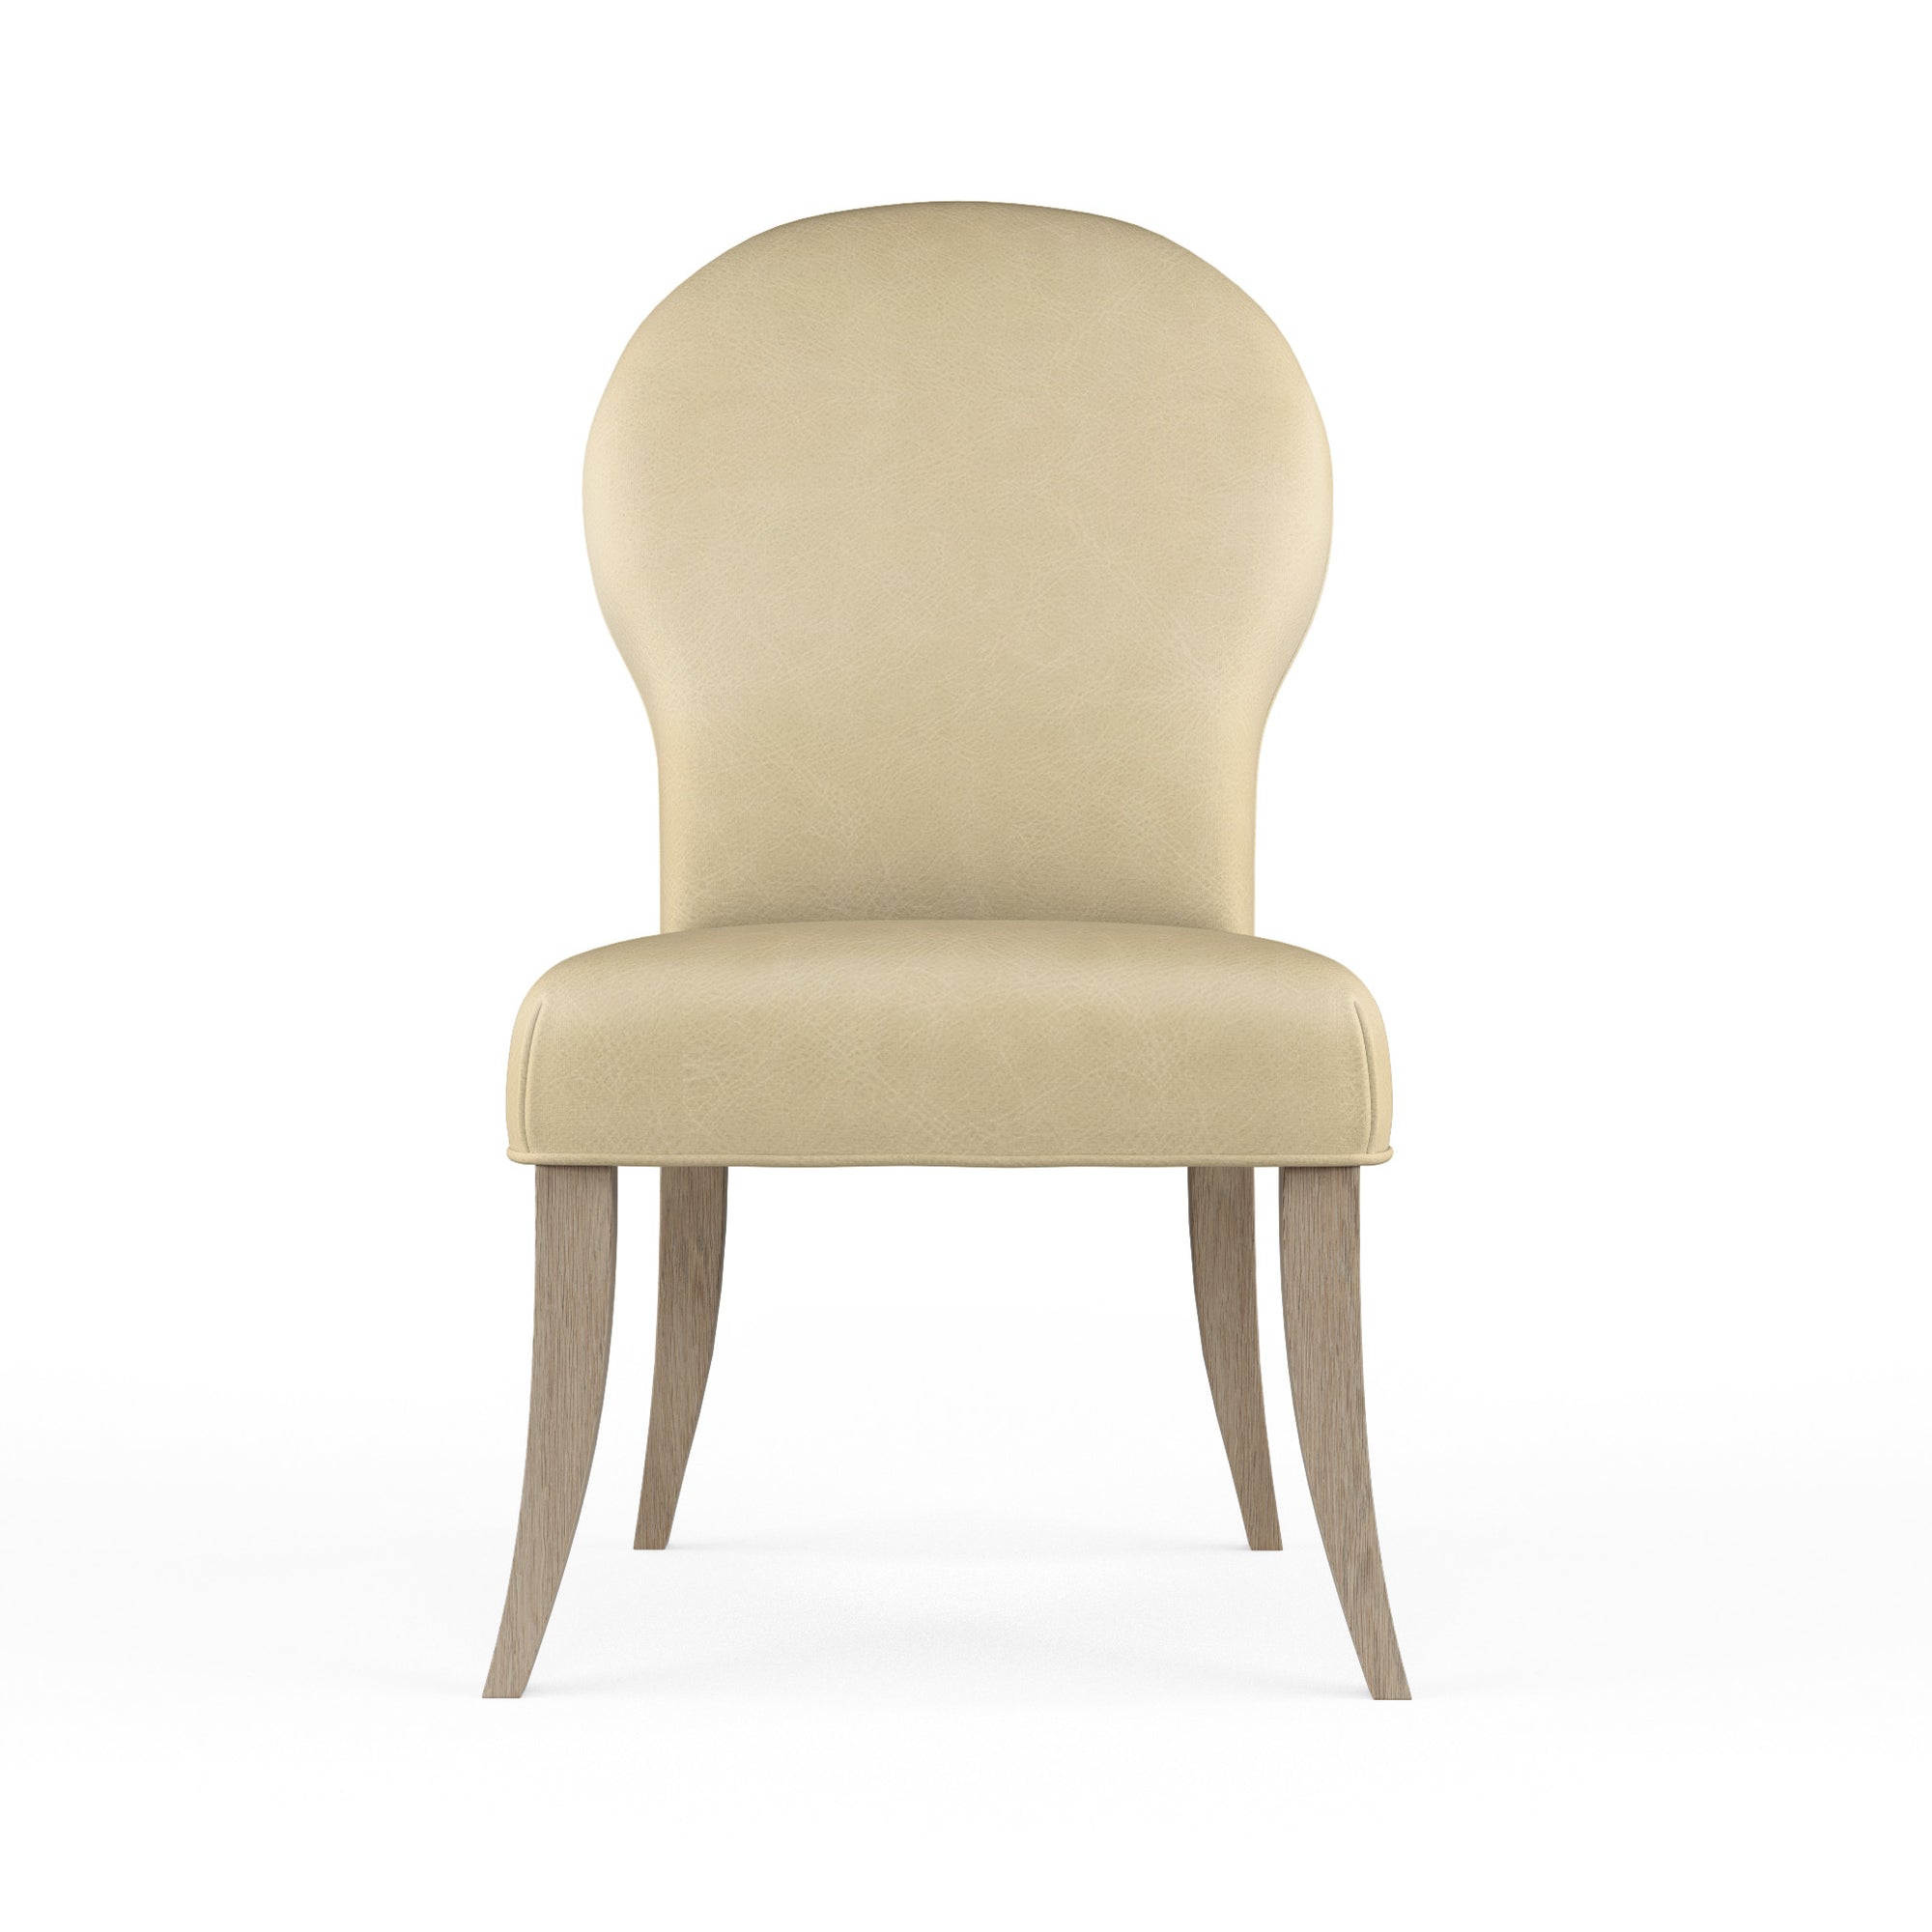 Caitlyn Dining Chair - Oyster Vintage Leather